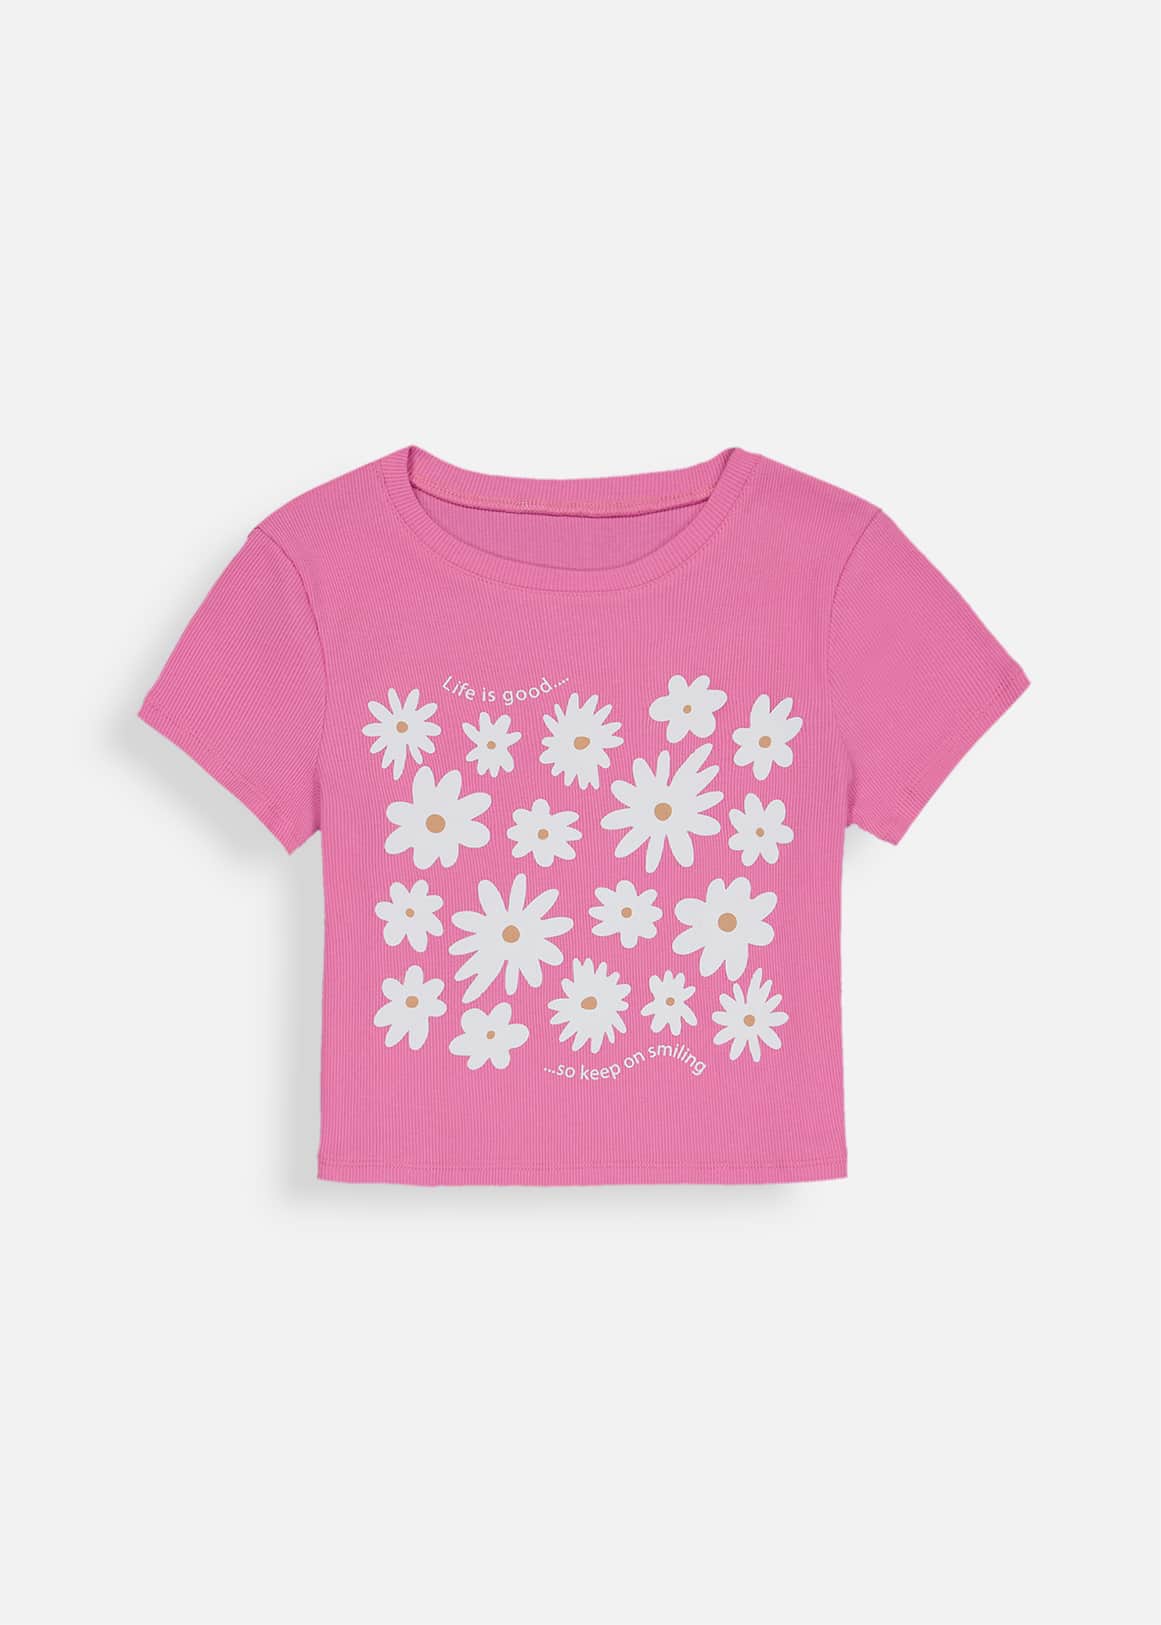 SS23 KVL DAISY TEE - Woolworths Mauritius Online